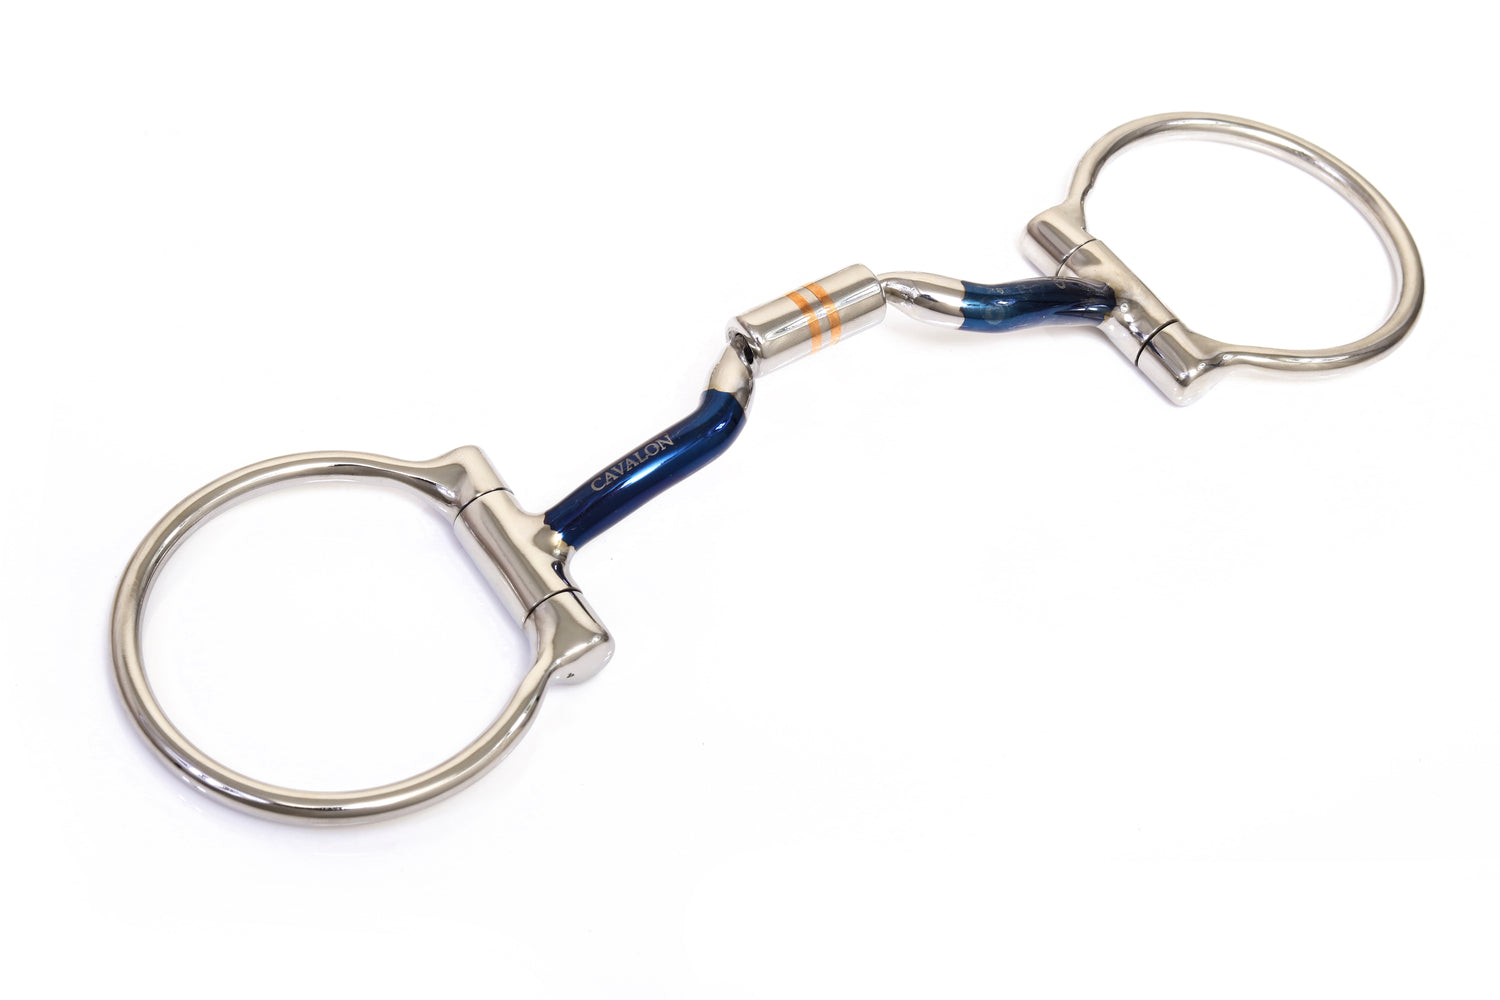 Cavalon D Ring Low Port Sweet Iron Comfort Snaffle Bit with Copper Barrel